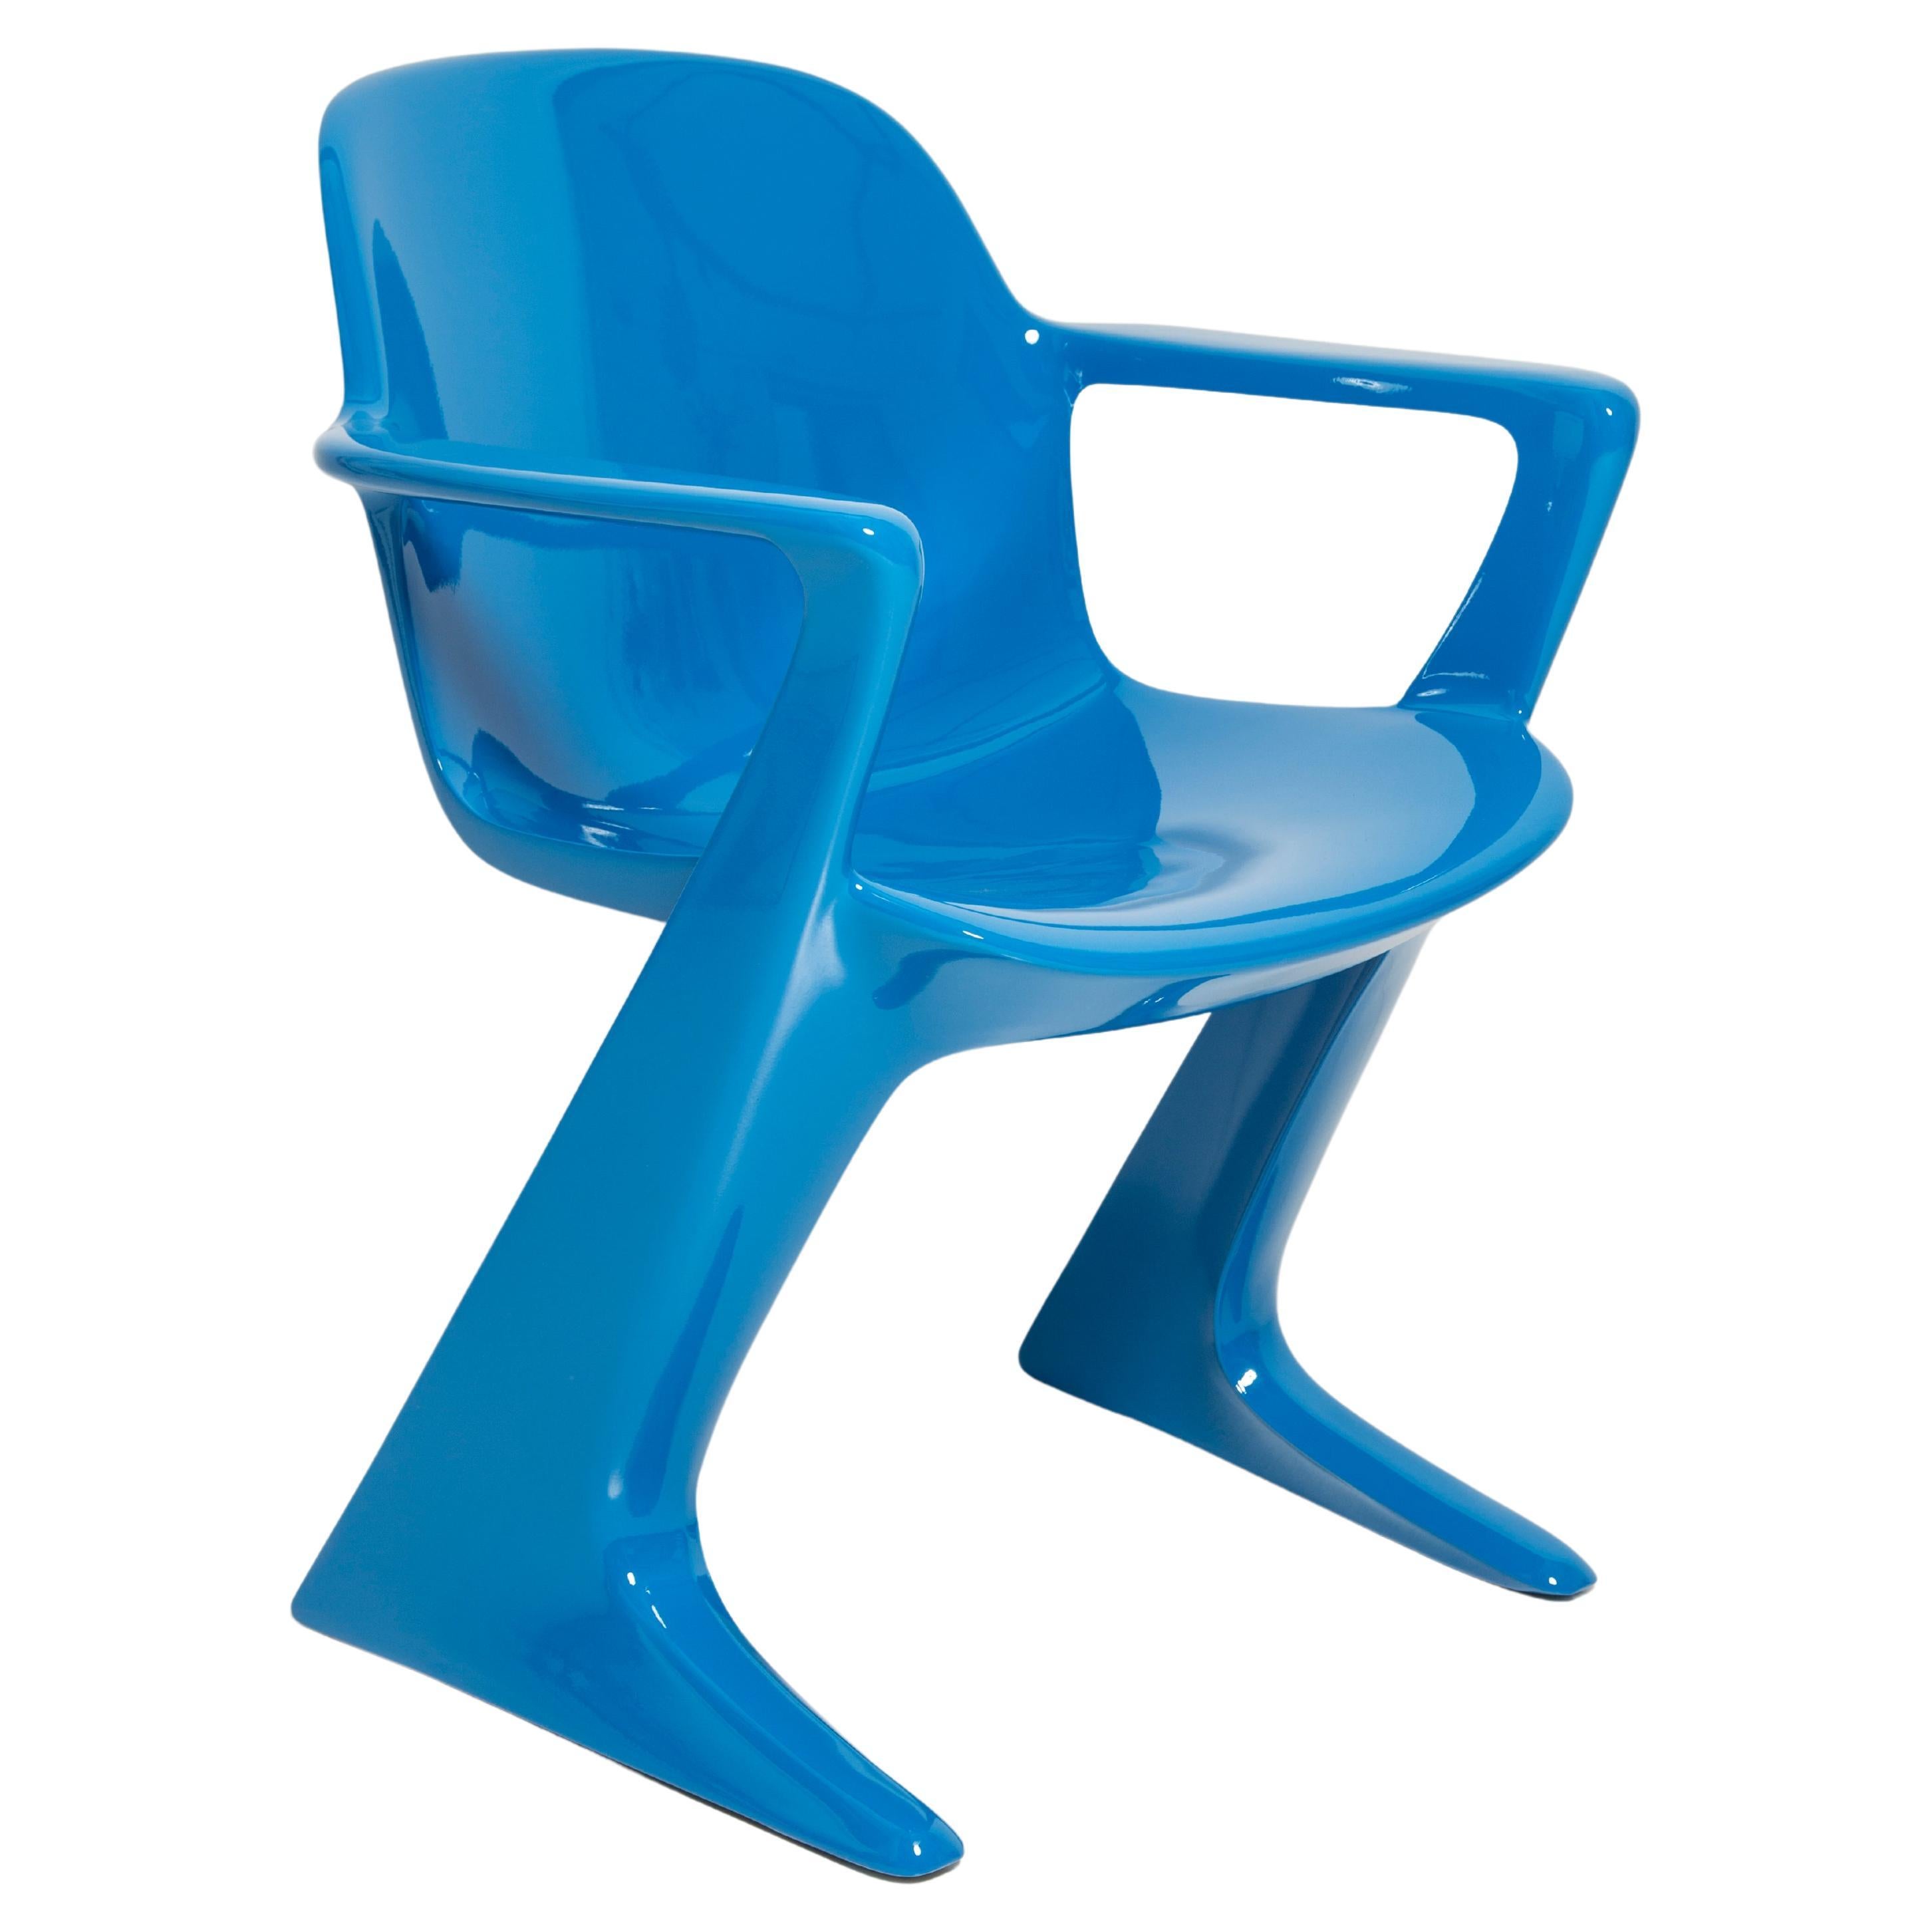 Blue Kangaroo Chair Designed by Ernst Moeckl, Germany, 1968 For Sale